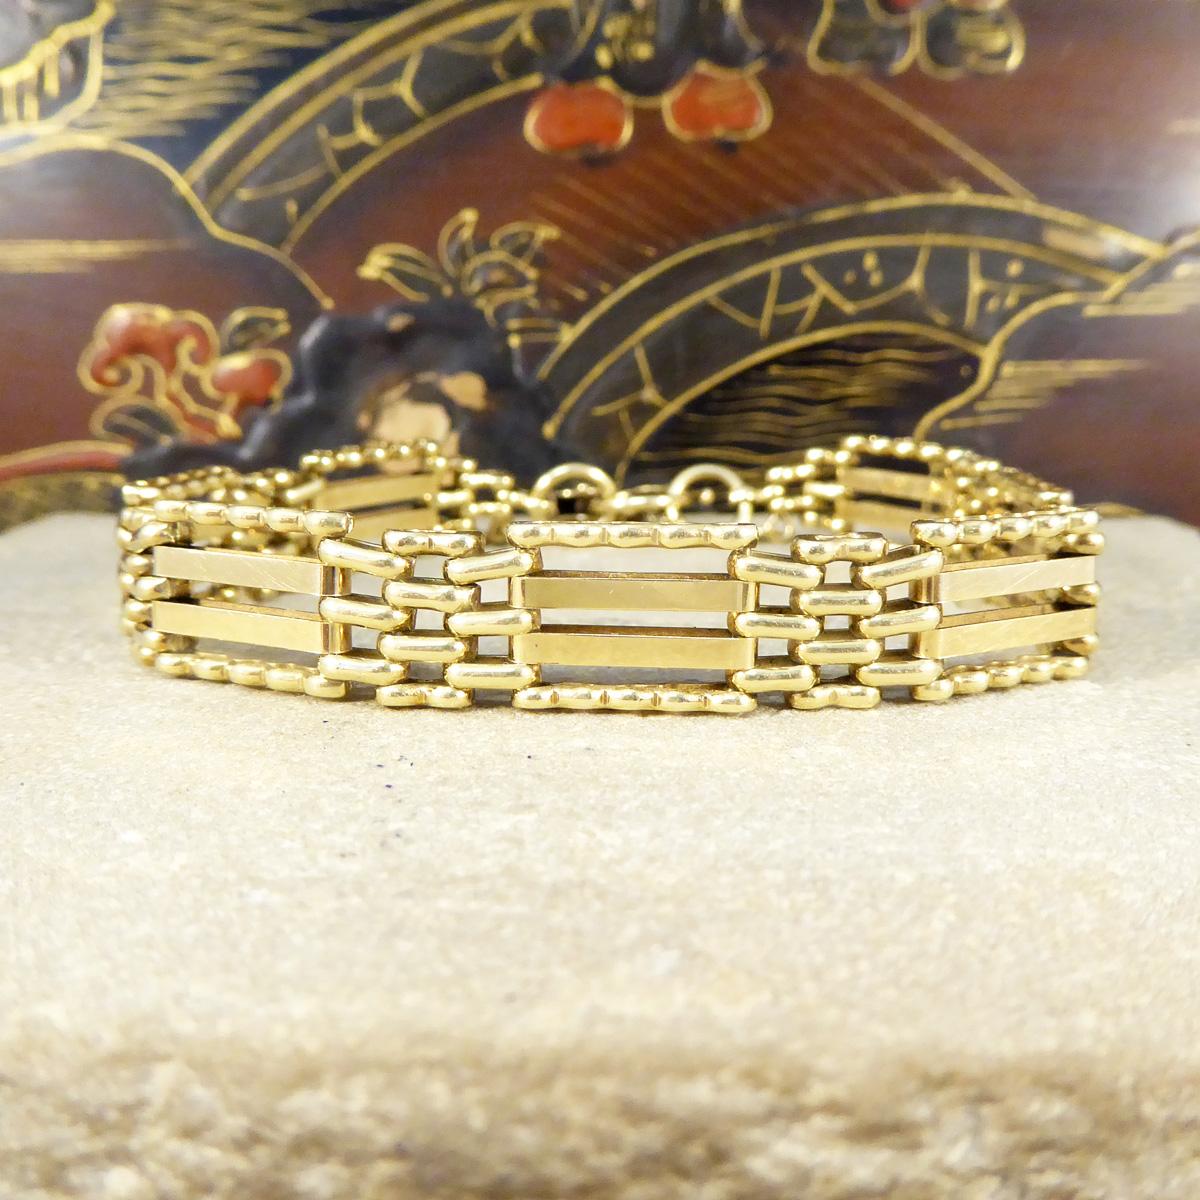 Edwardian C1983 Yellow Gold Gate Bracelet with Heart Lock Clasp and Safety Chain